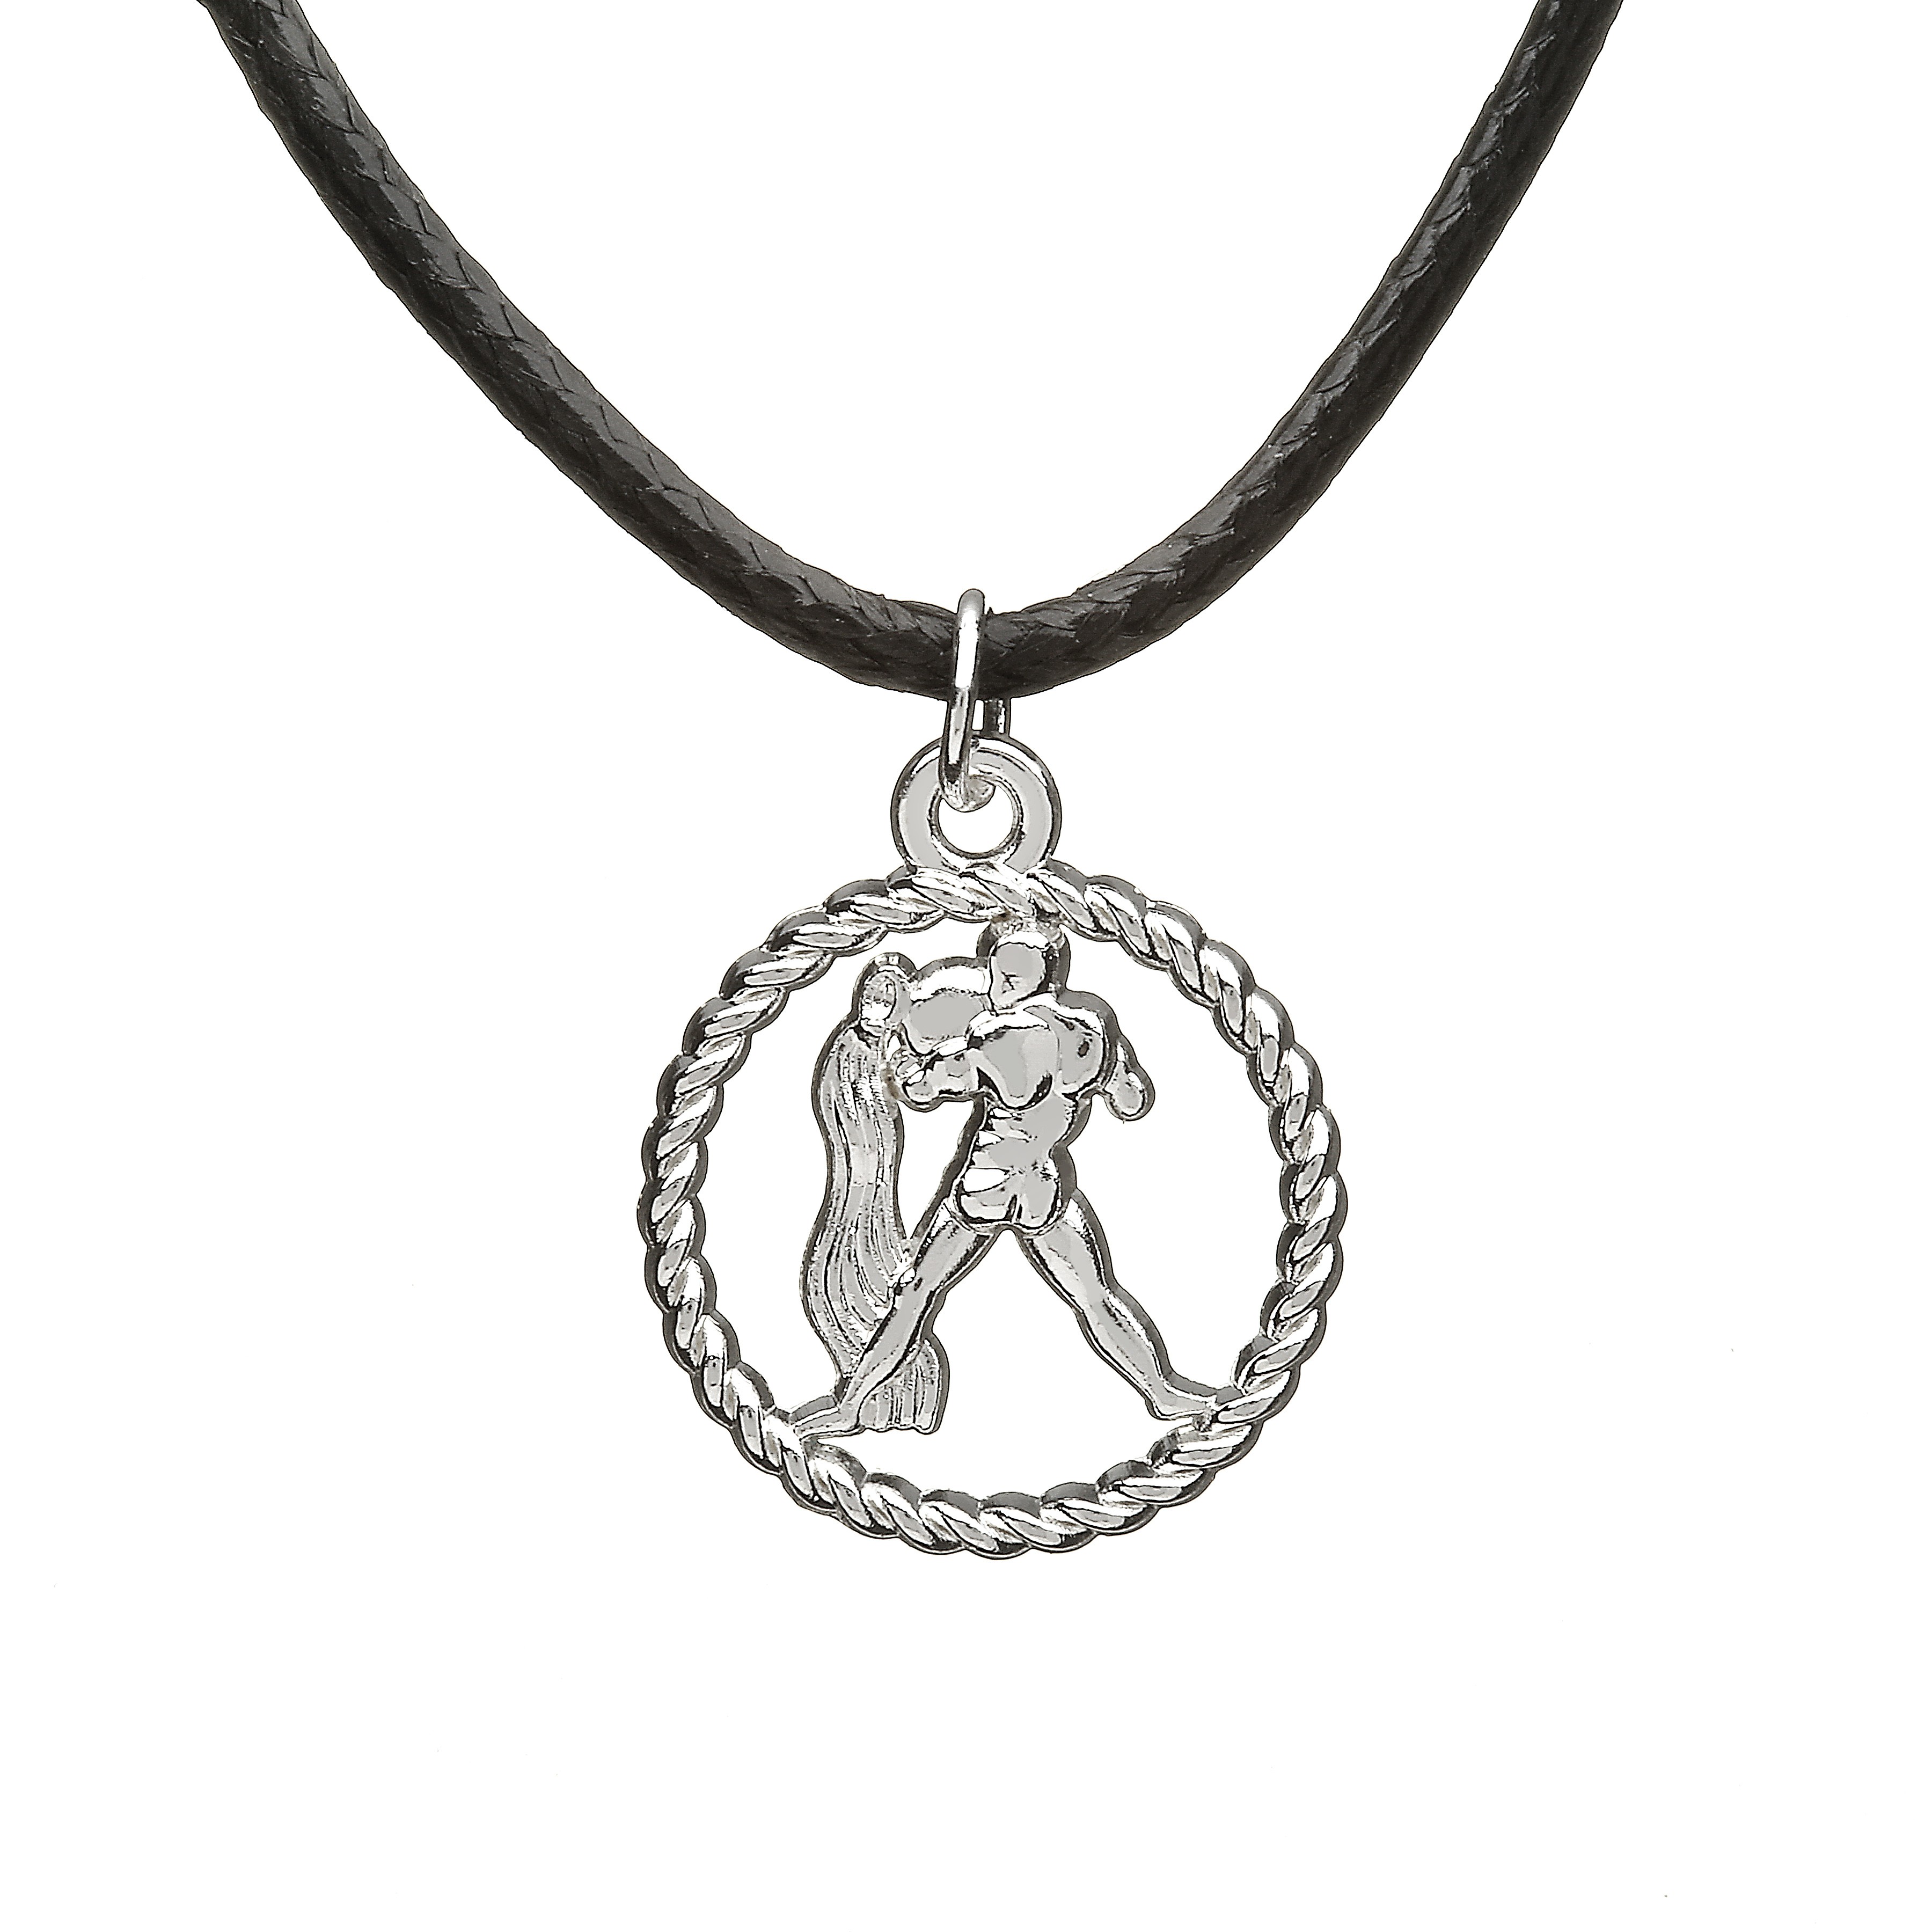 Aquarius Necklace with Charm Pendant | Linjer Jewelry